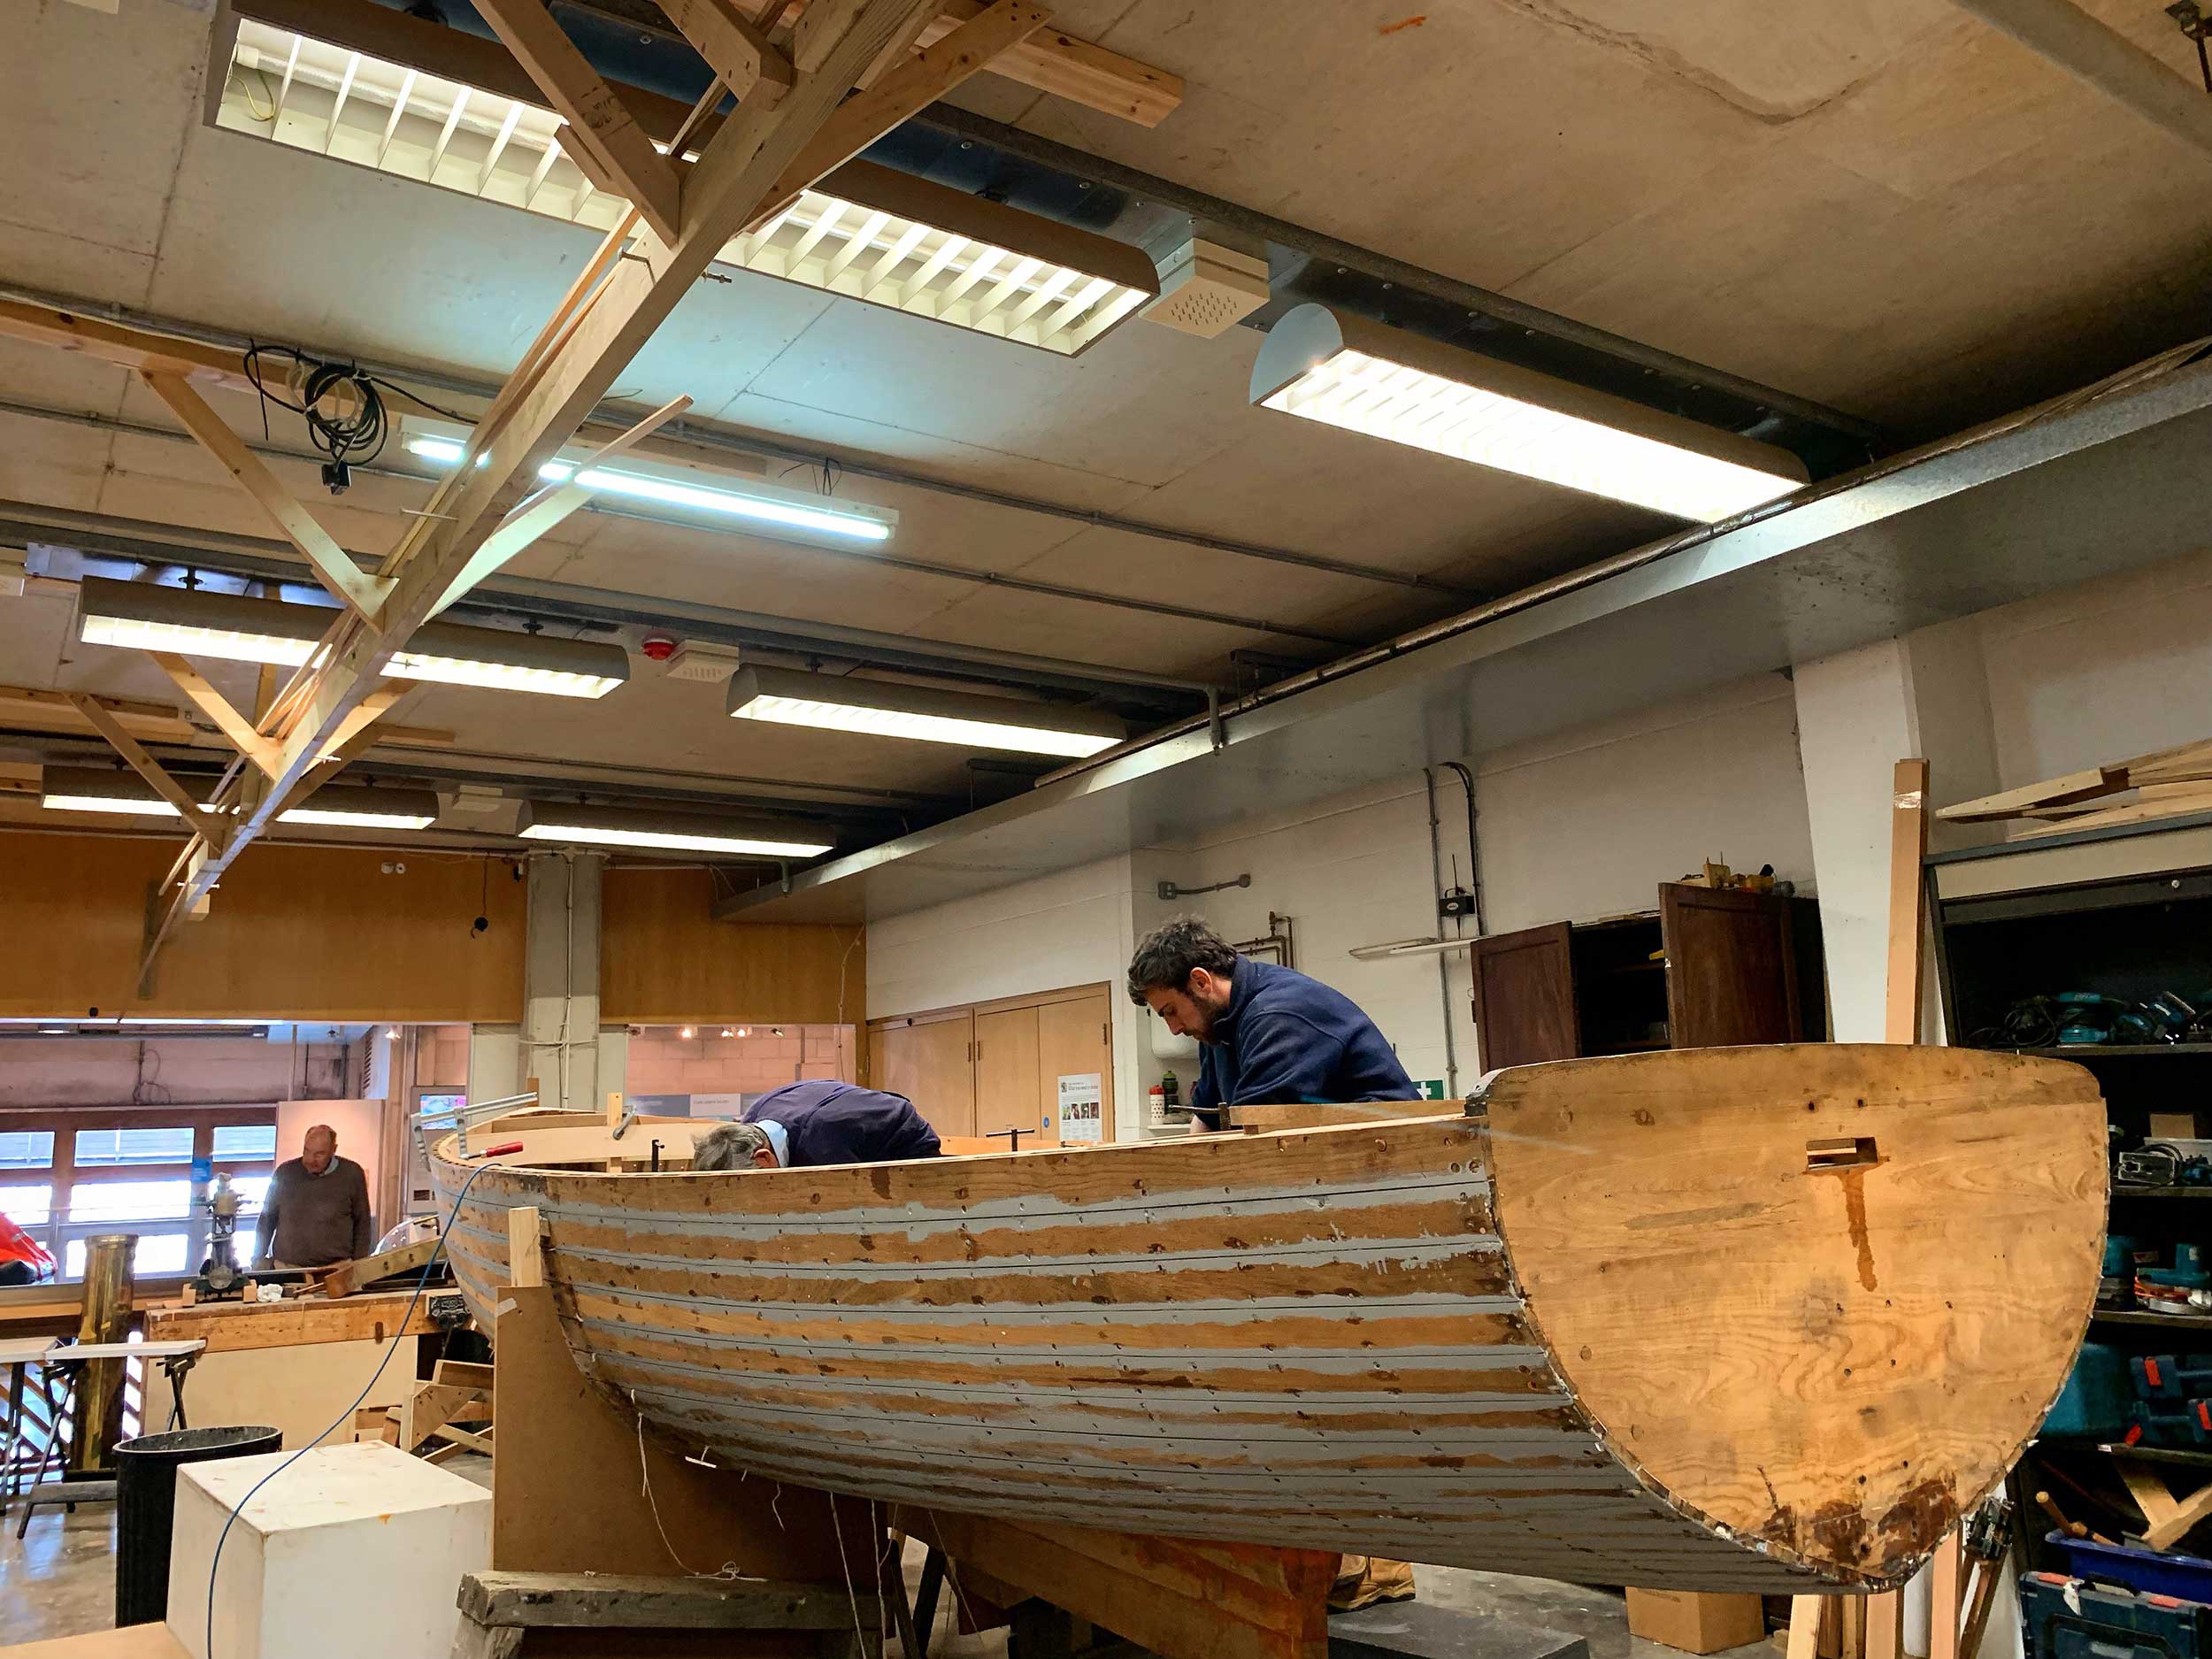 Boatbuilding volunteers at National Maritime Museum Cornwall working on the restoration of teak-built steam launch, 'Emma'.